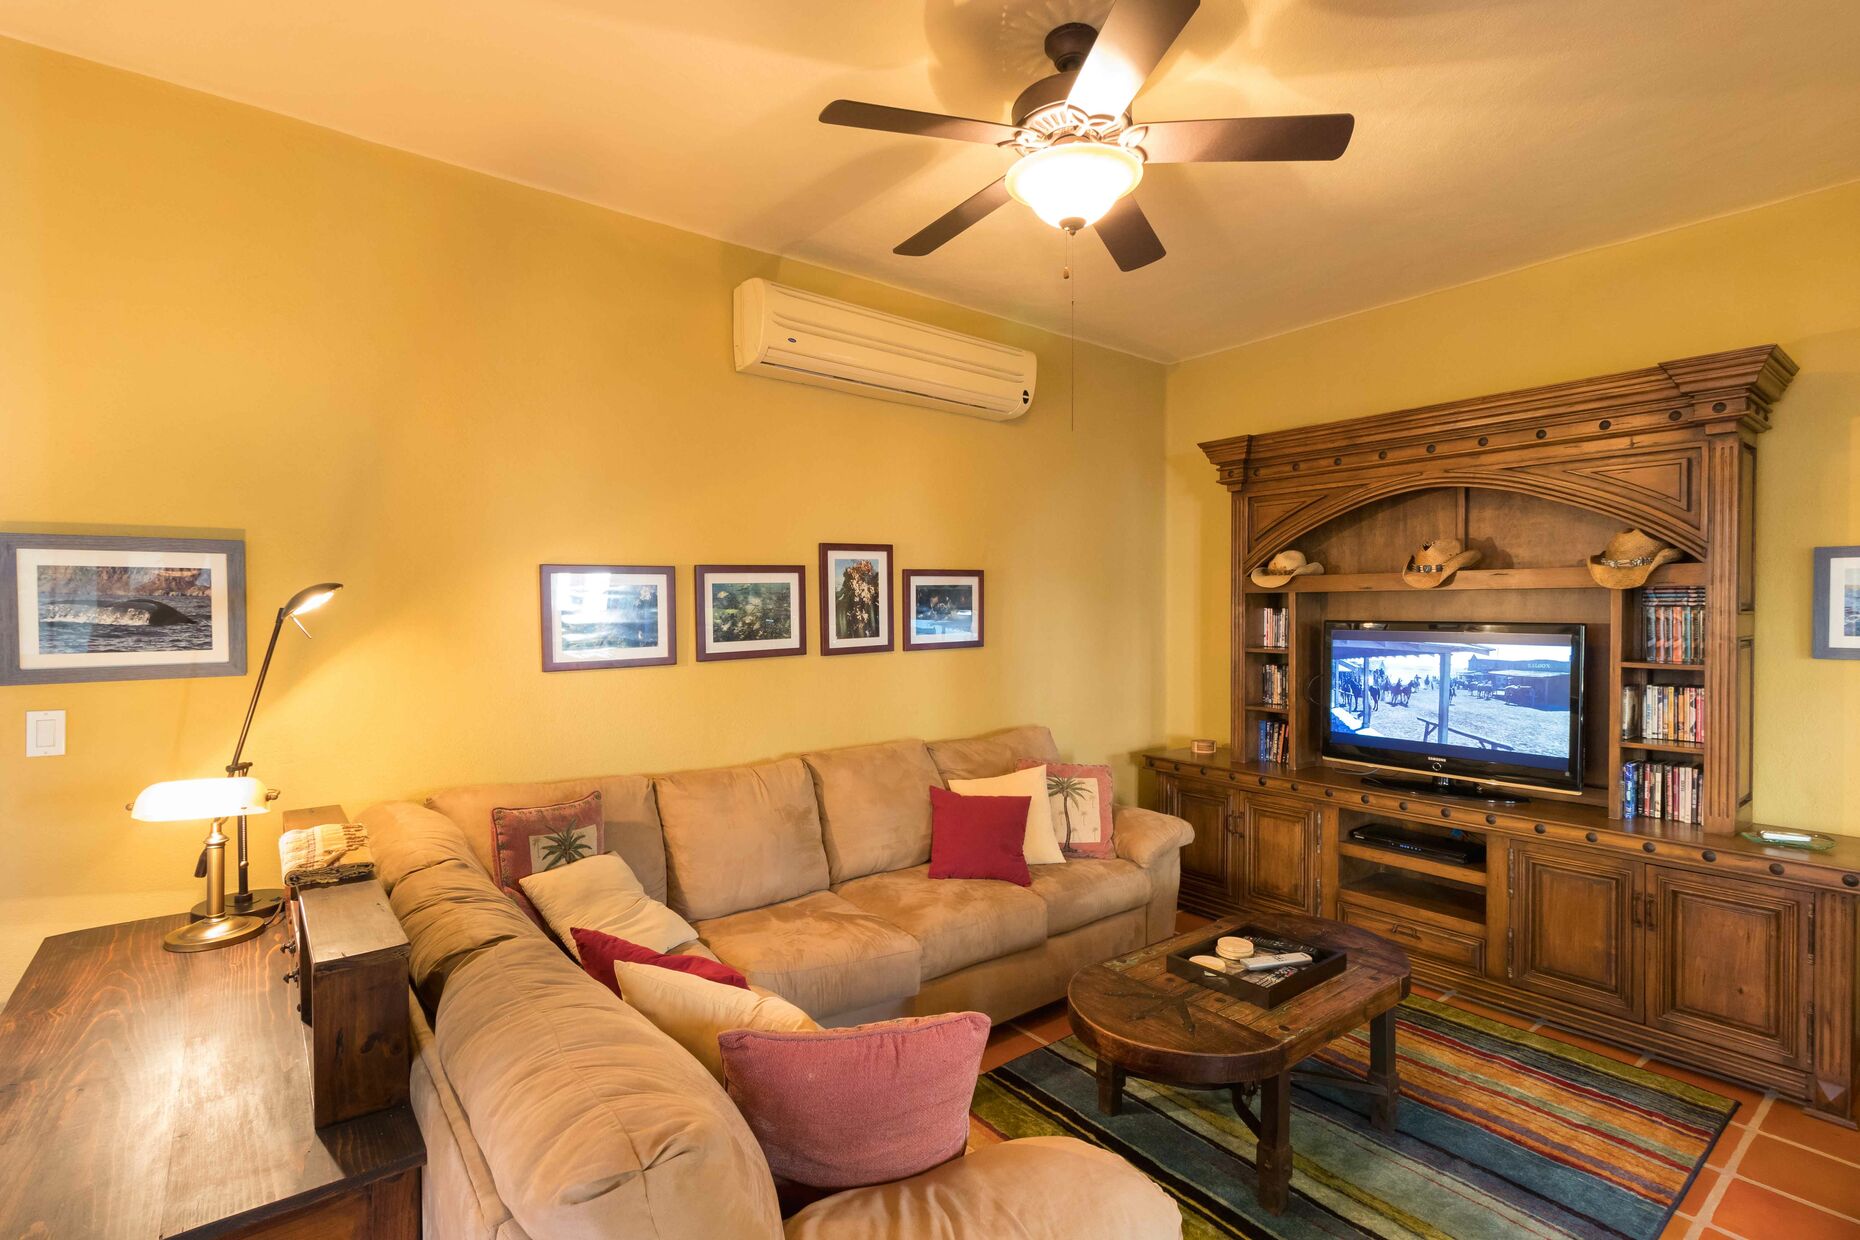 Living Room / AC / Ceiling Fan / Wi - Fi / TV and DVD